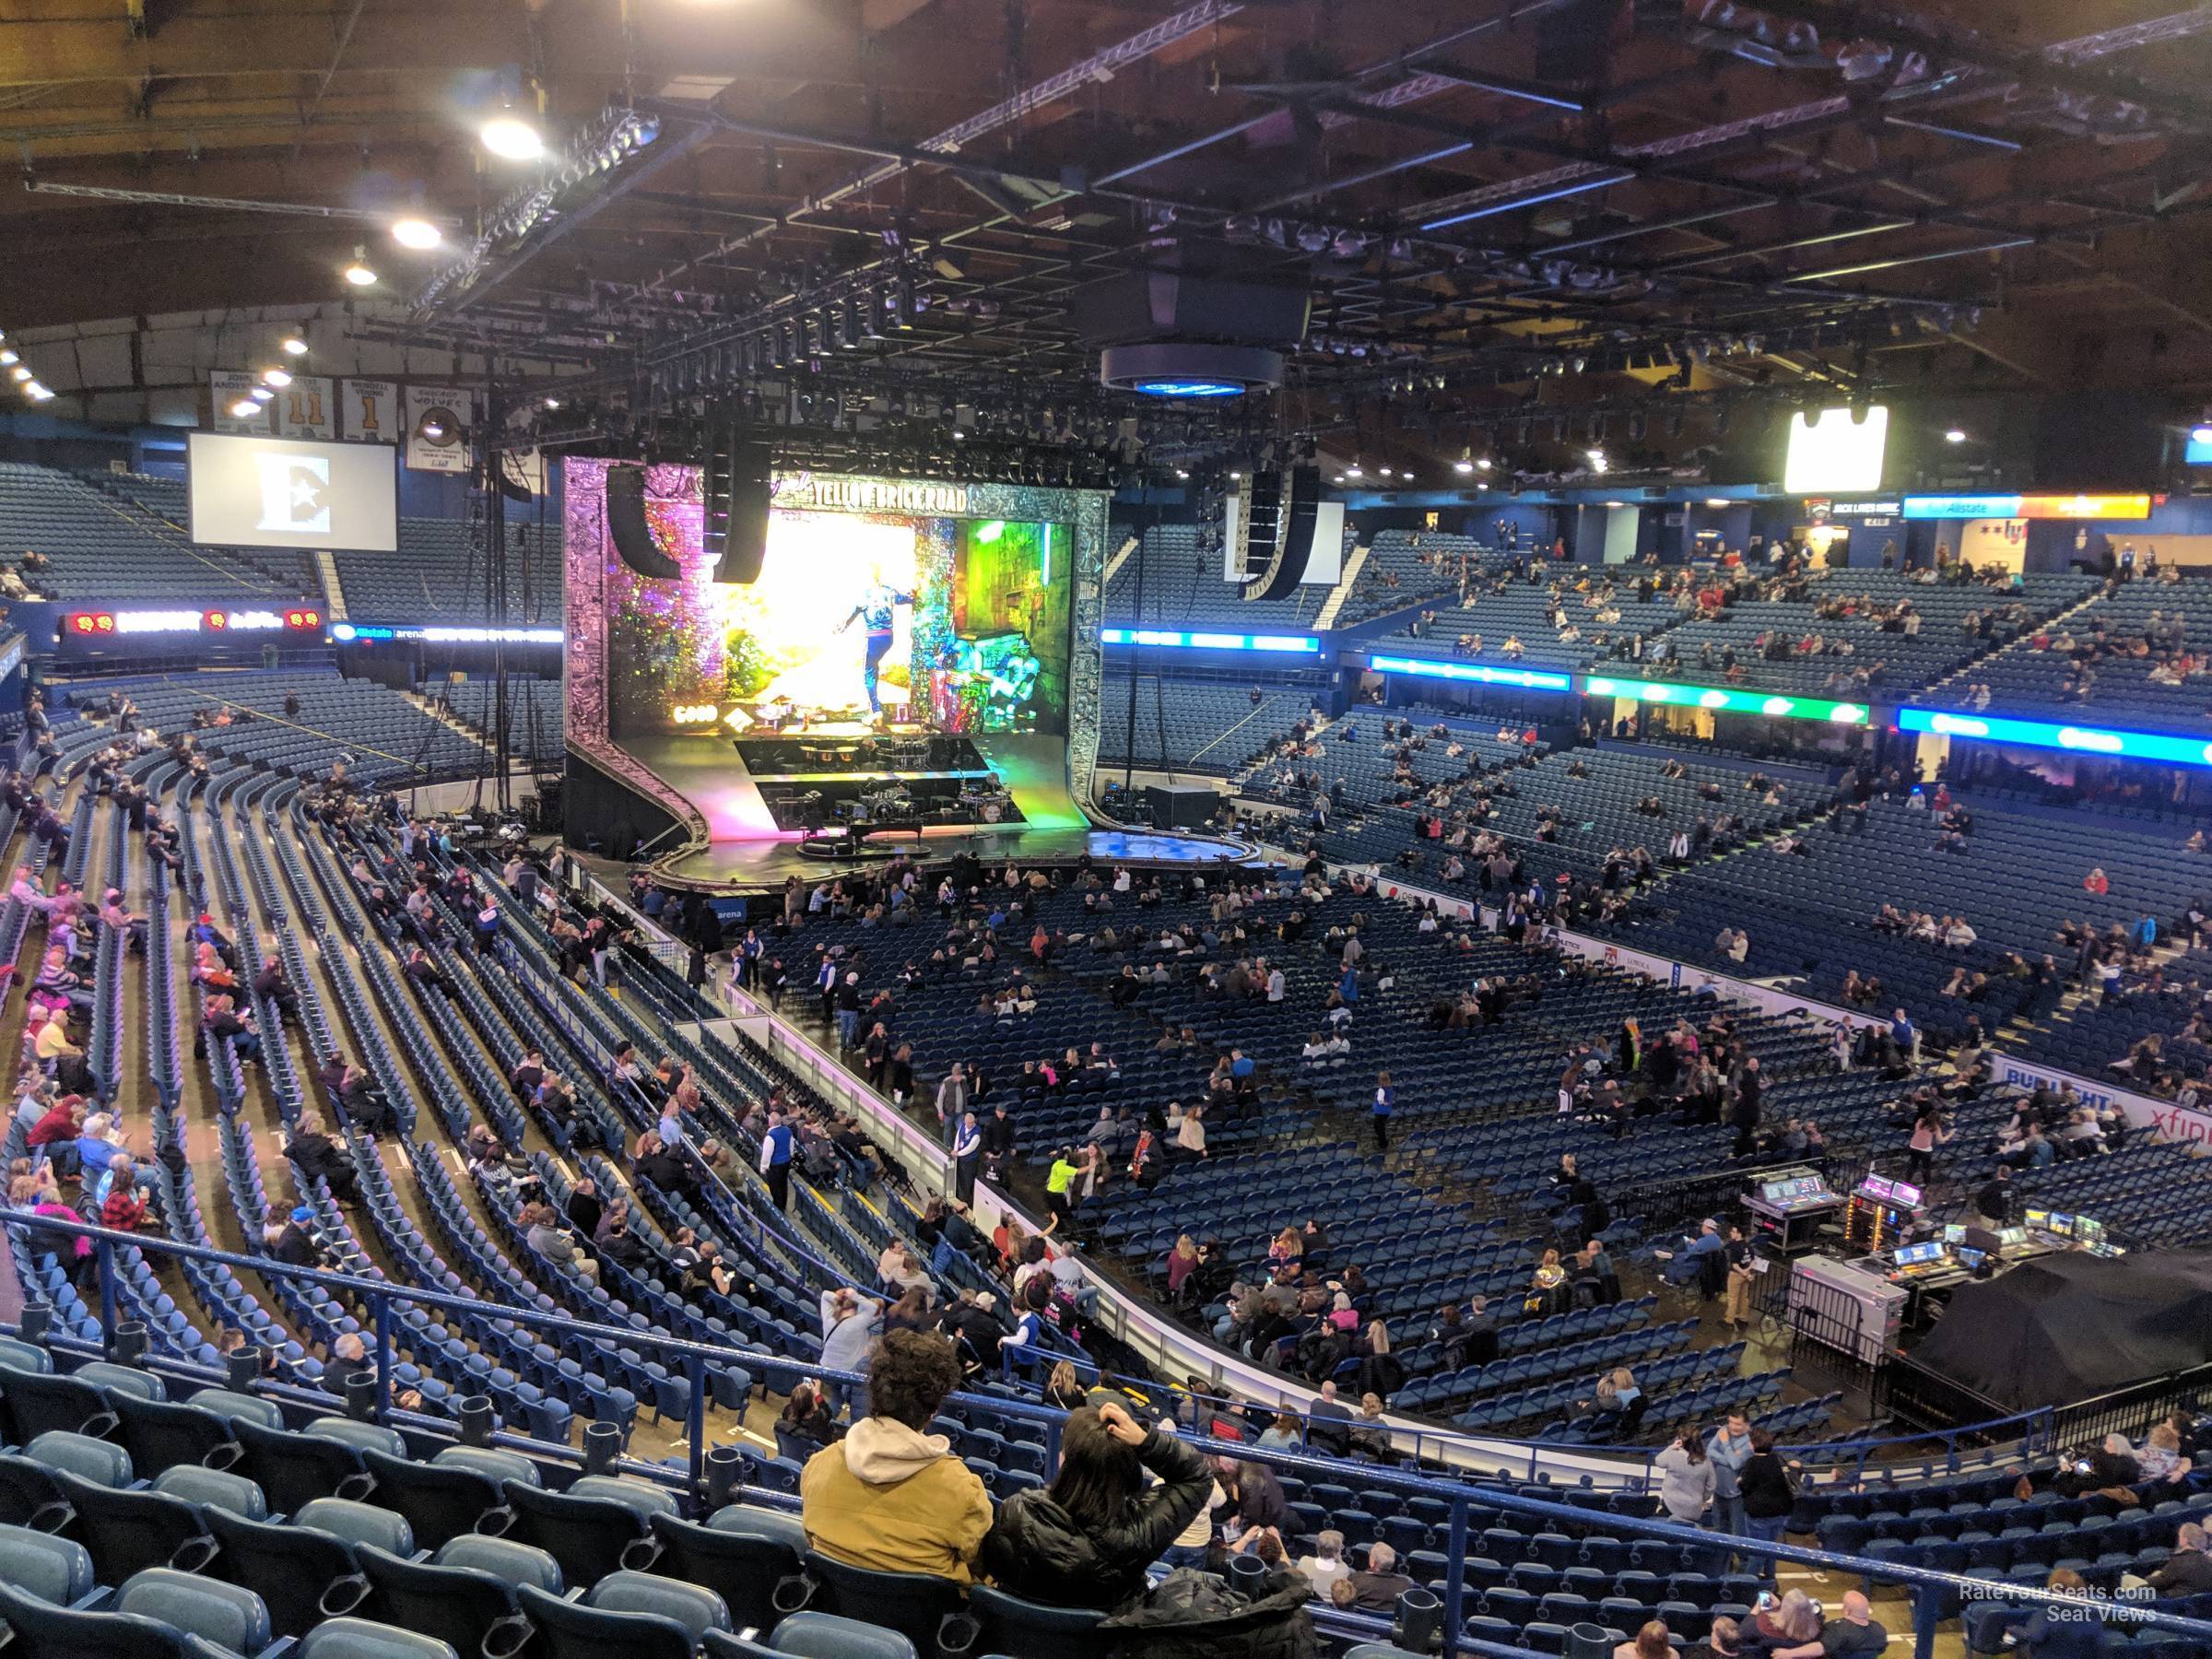 Section 216 at Allstate Arena for Concerts